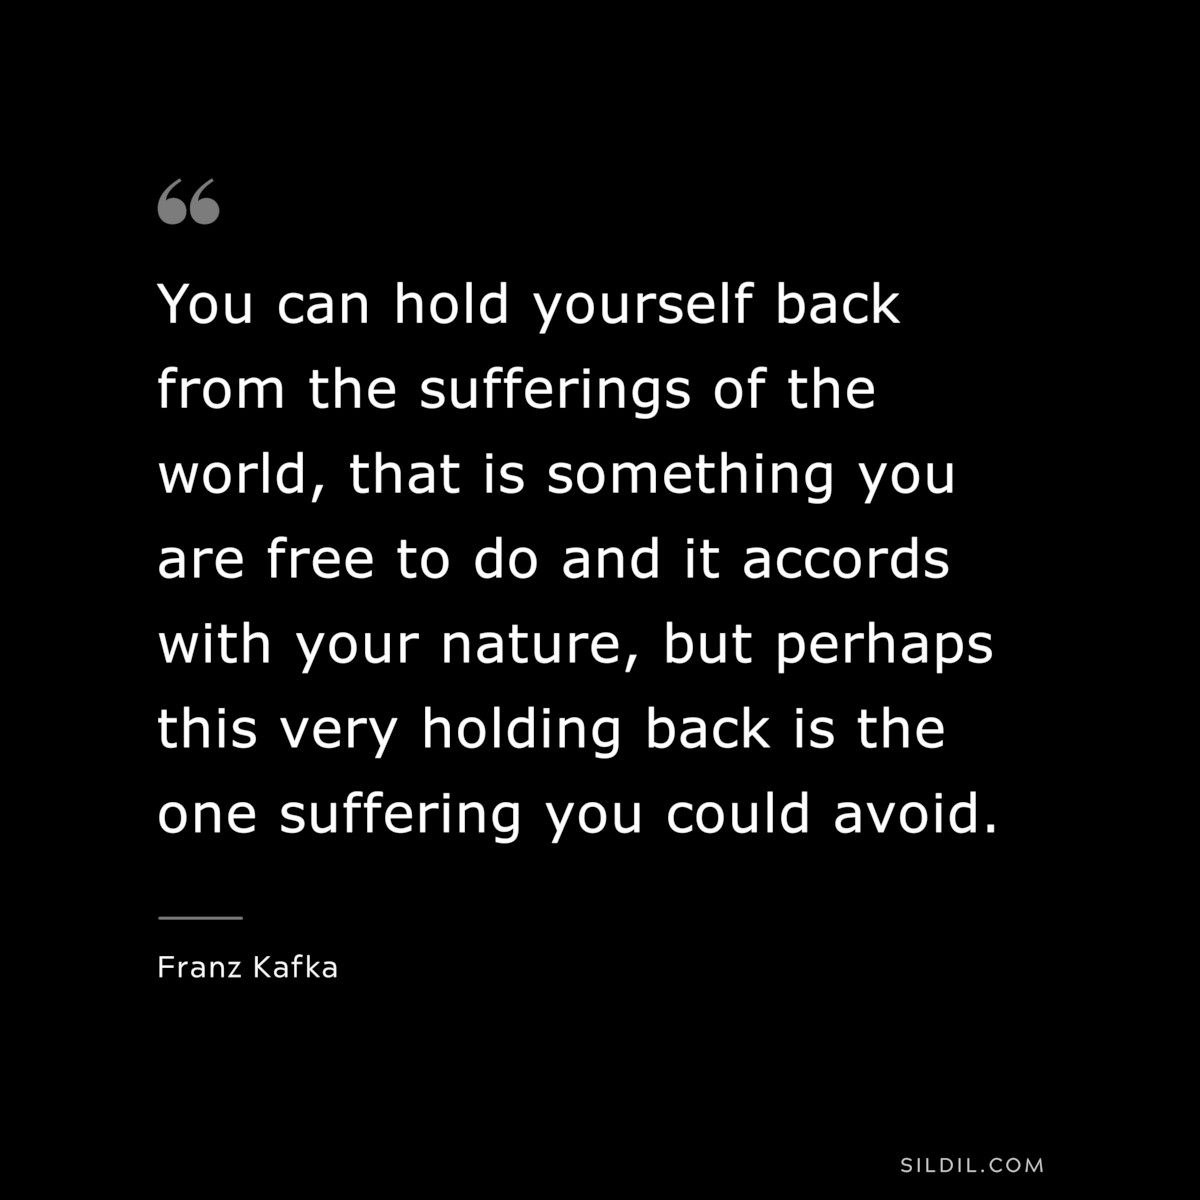 You can hold yourself back from the sufferings of the world, that is something you are free to do and it accords with your nature, but perhaps this very holding back is the one suffering you could avoid. ― Franz Kafka